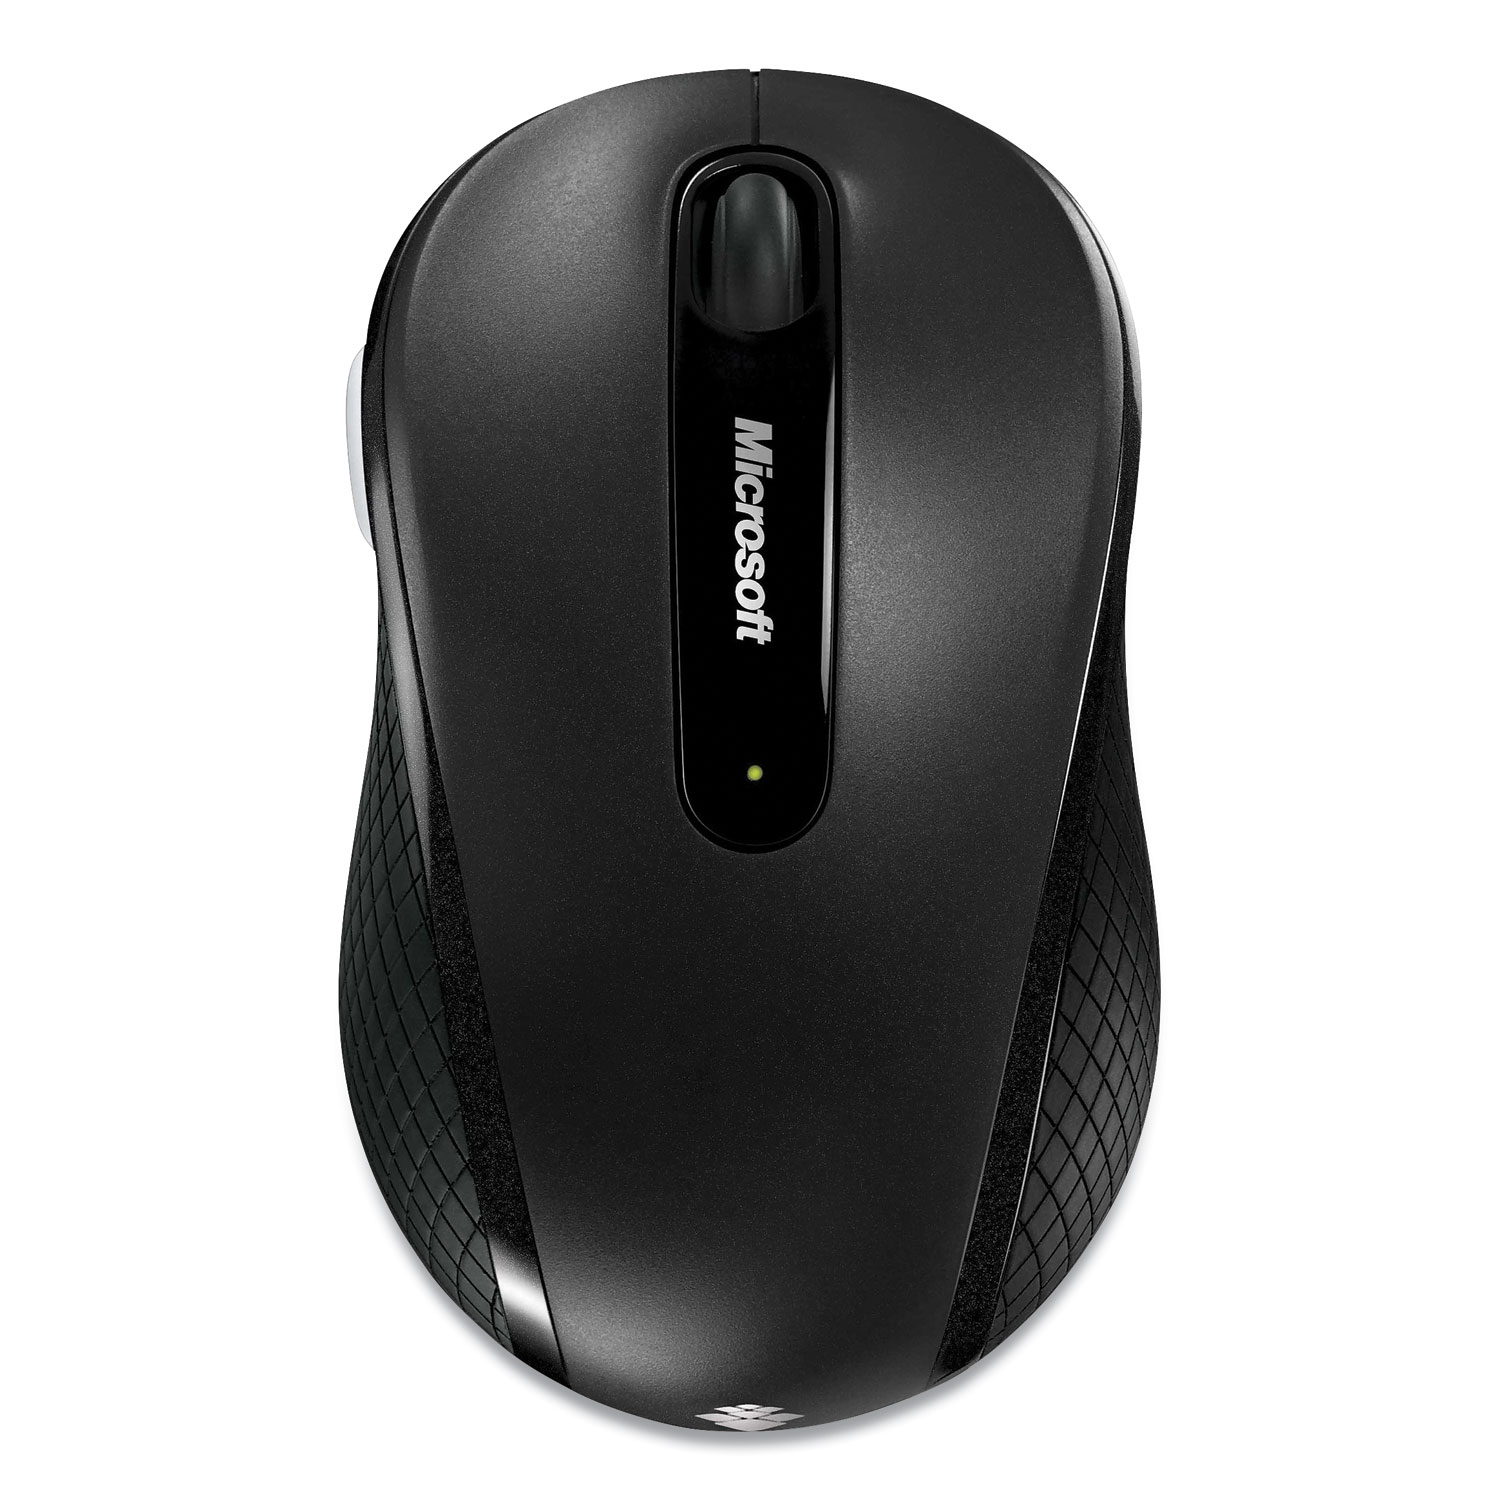  Microsoft D5D-00001 Mobile 4000 Wireless Optical Mouse, 2.4 GHz Frequency/15 ft Wireless Range, Left/Right Hand Use, Graphite (MSF811870) 